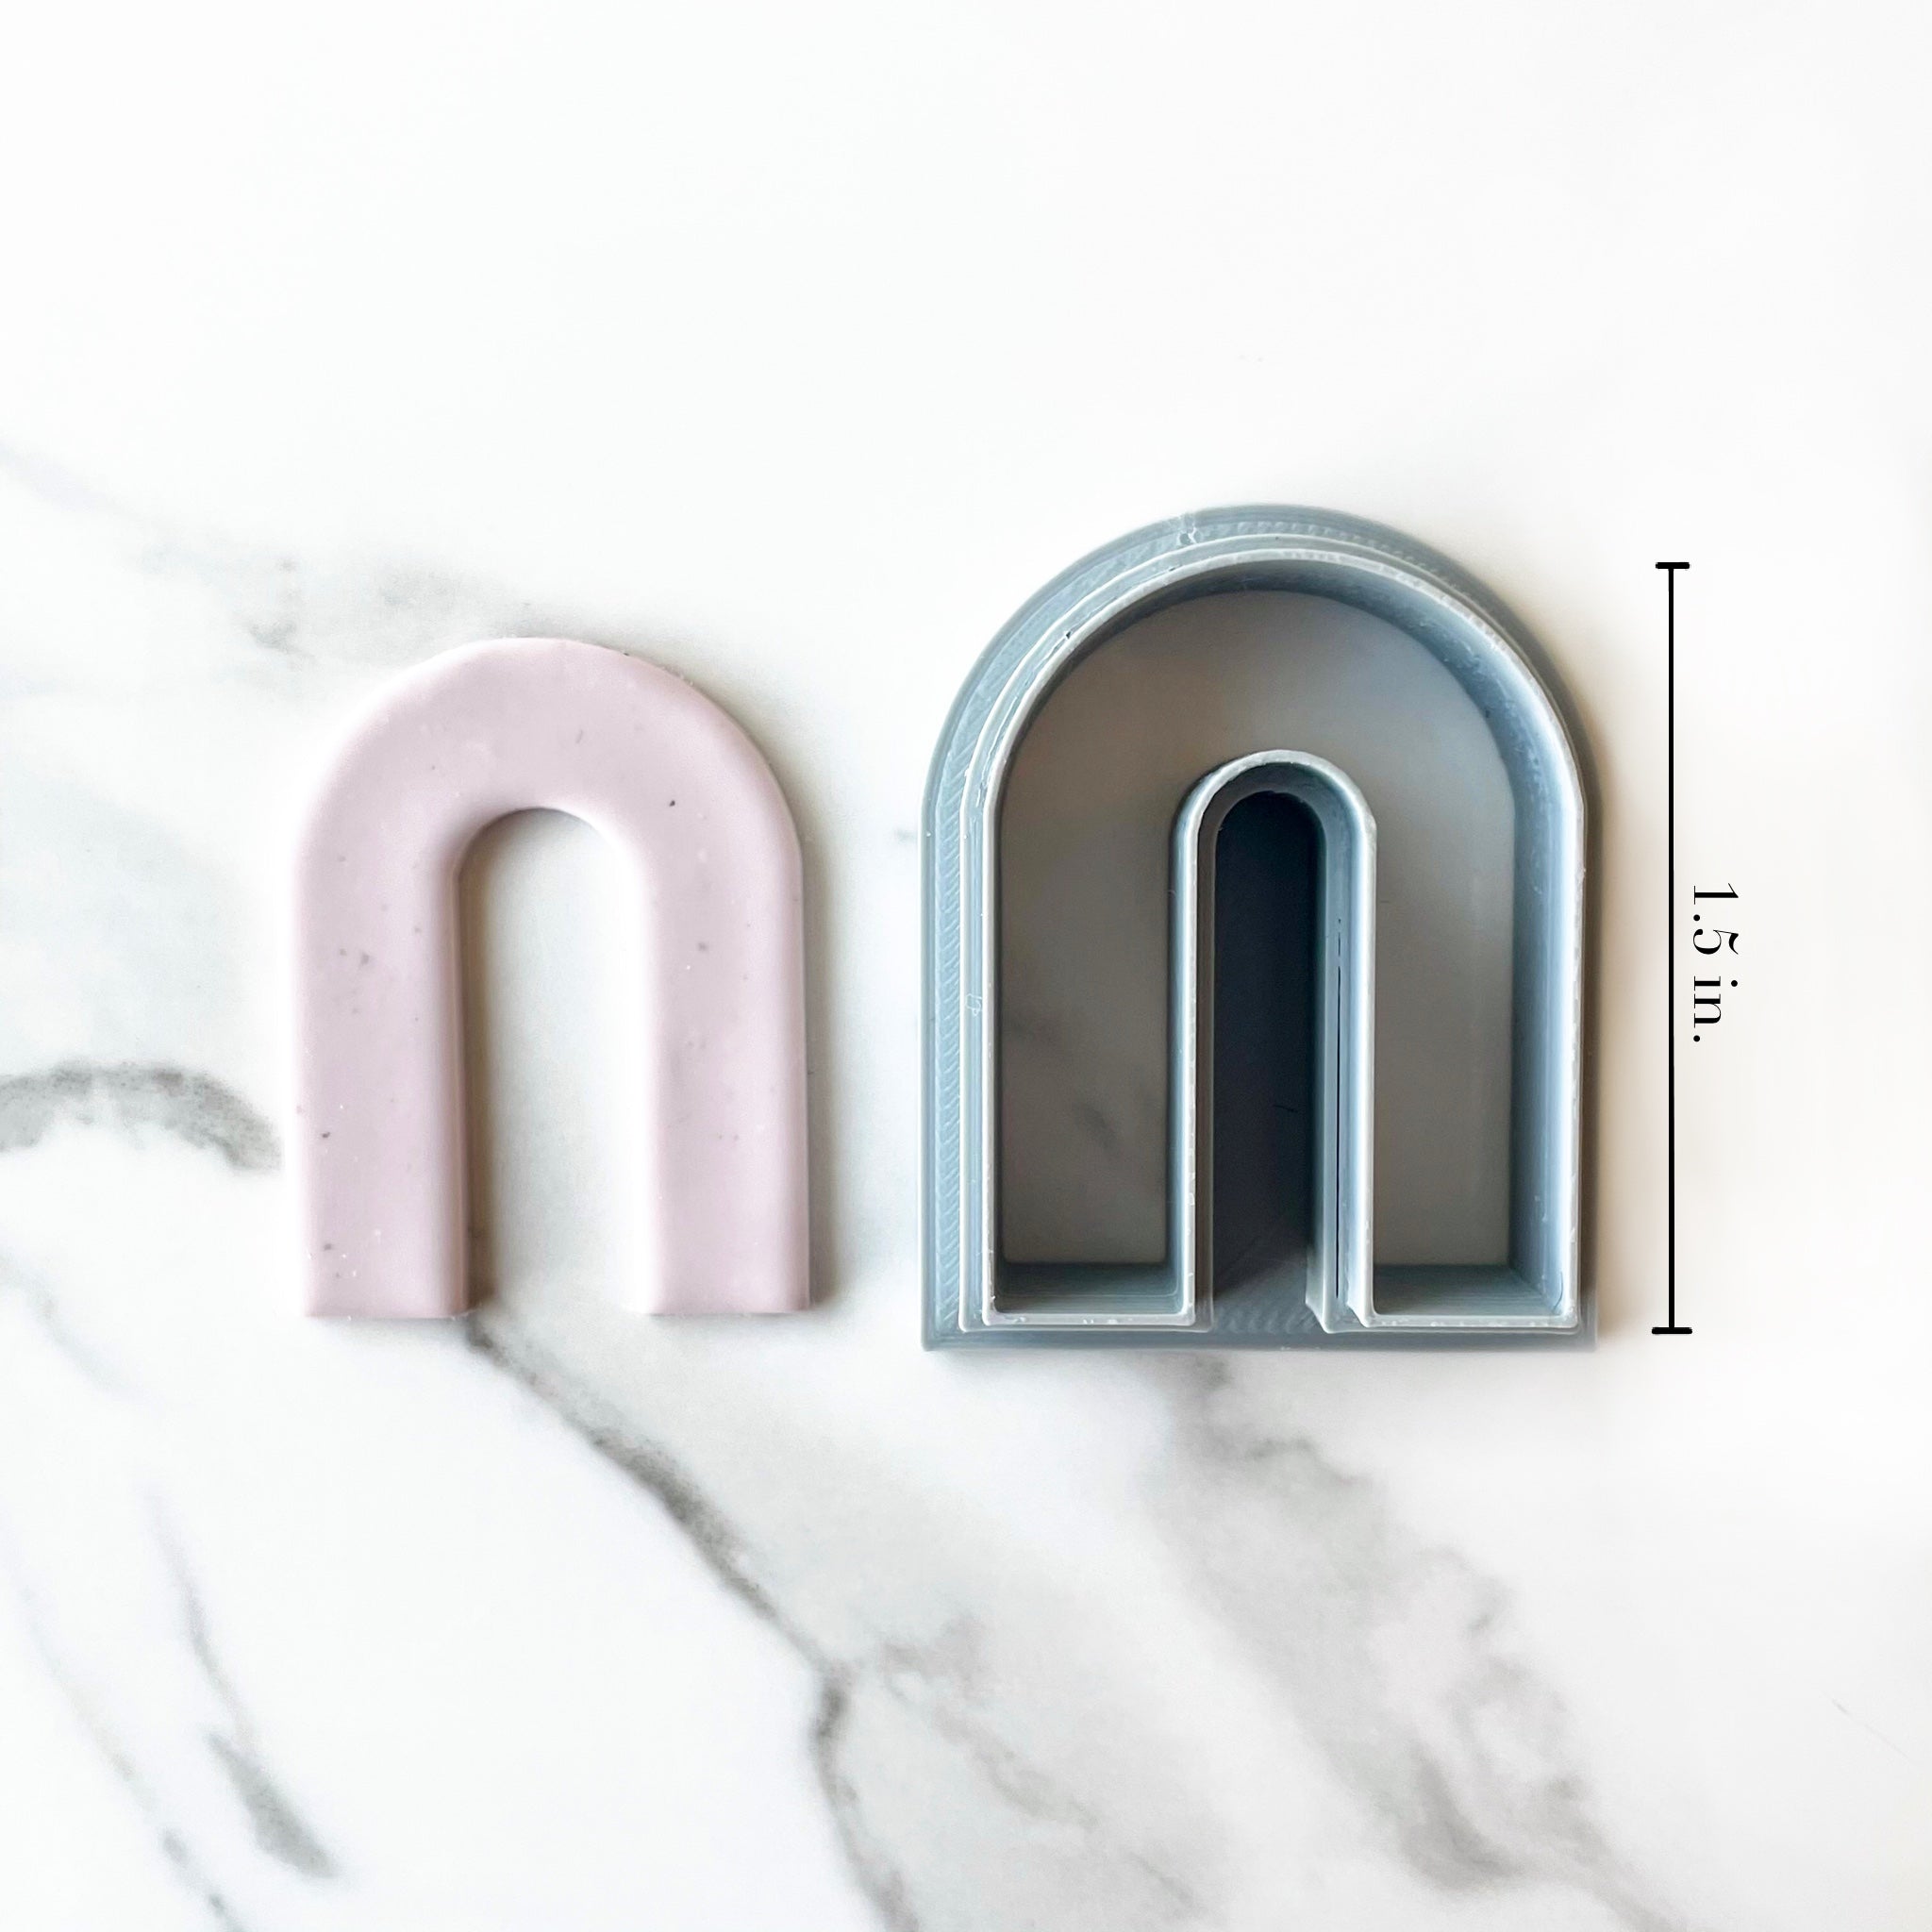 Polymer clay cutters - I've just launched my first range of cutters  designed especially for use with polymer clay, all with a 0.4mm cutting  edge and made from bioplastic. This is my